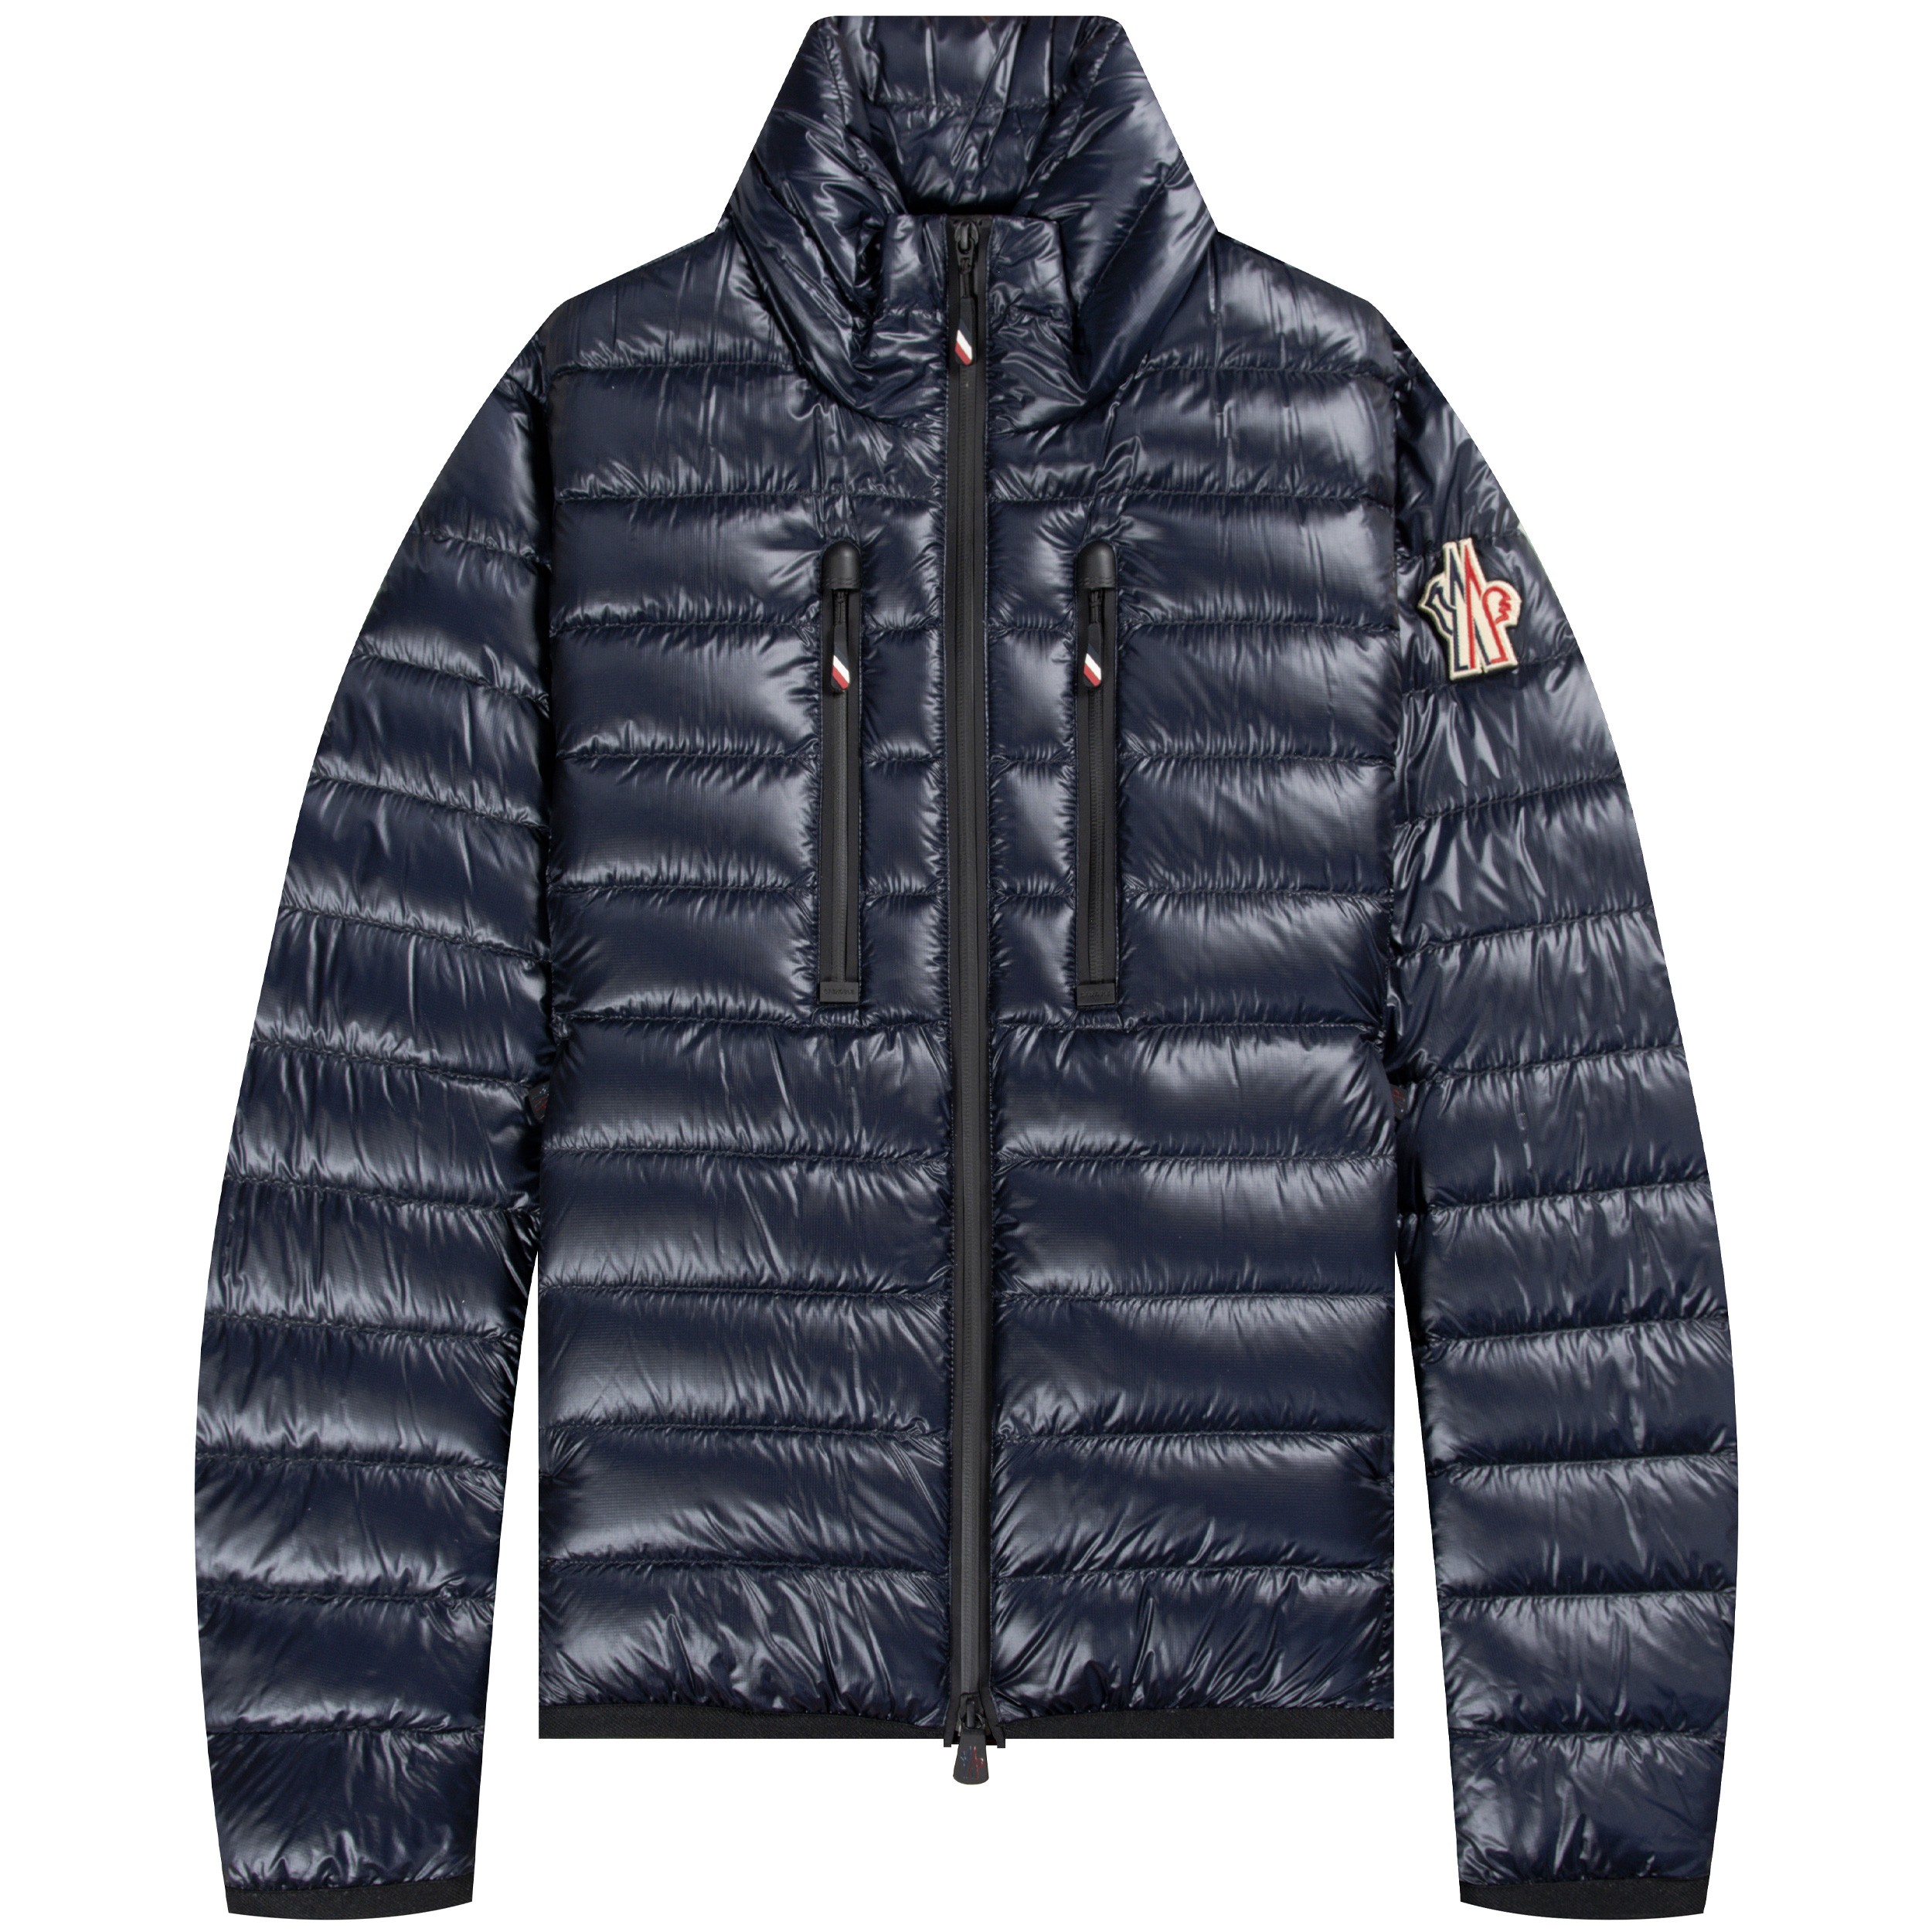 https://www.pockets.co.uk/media/catalog/product/cache/afca9a4301a4f957e27126911791b579/m/o/moncler-aw20-hers-jacket-navy-1_1.jpg